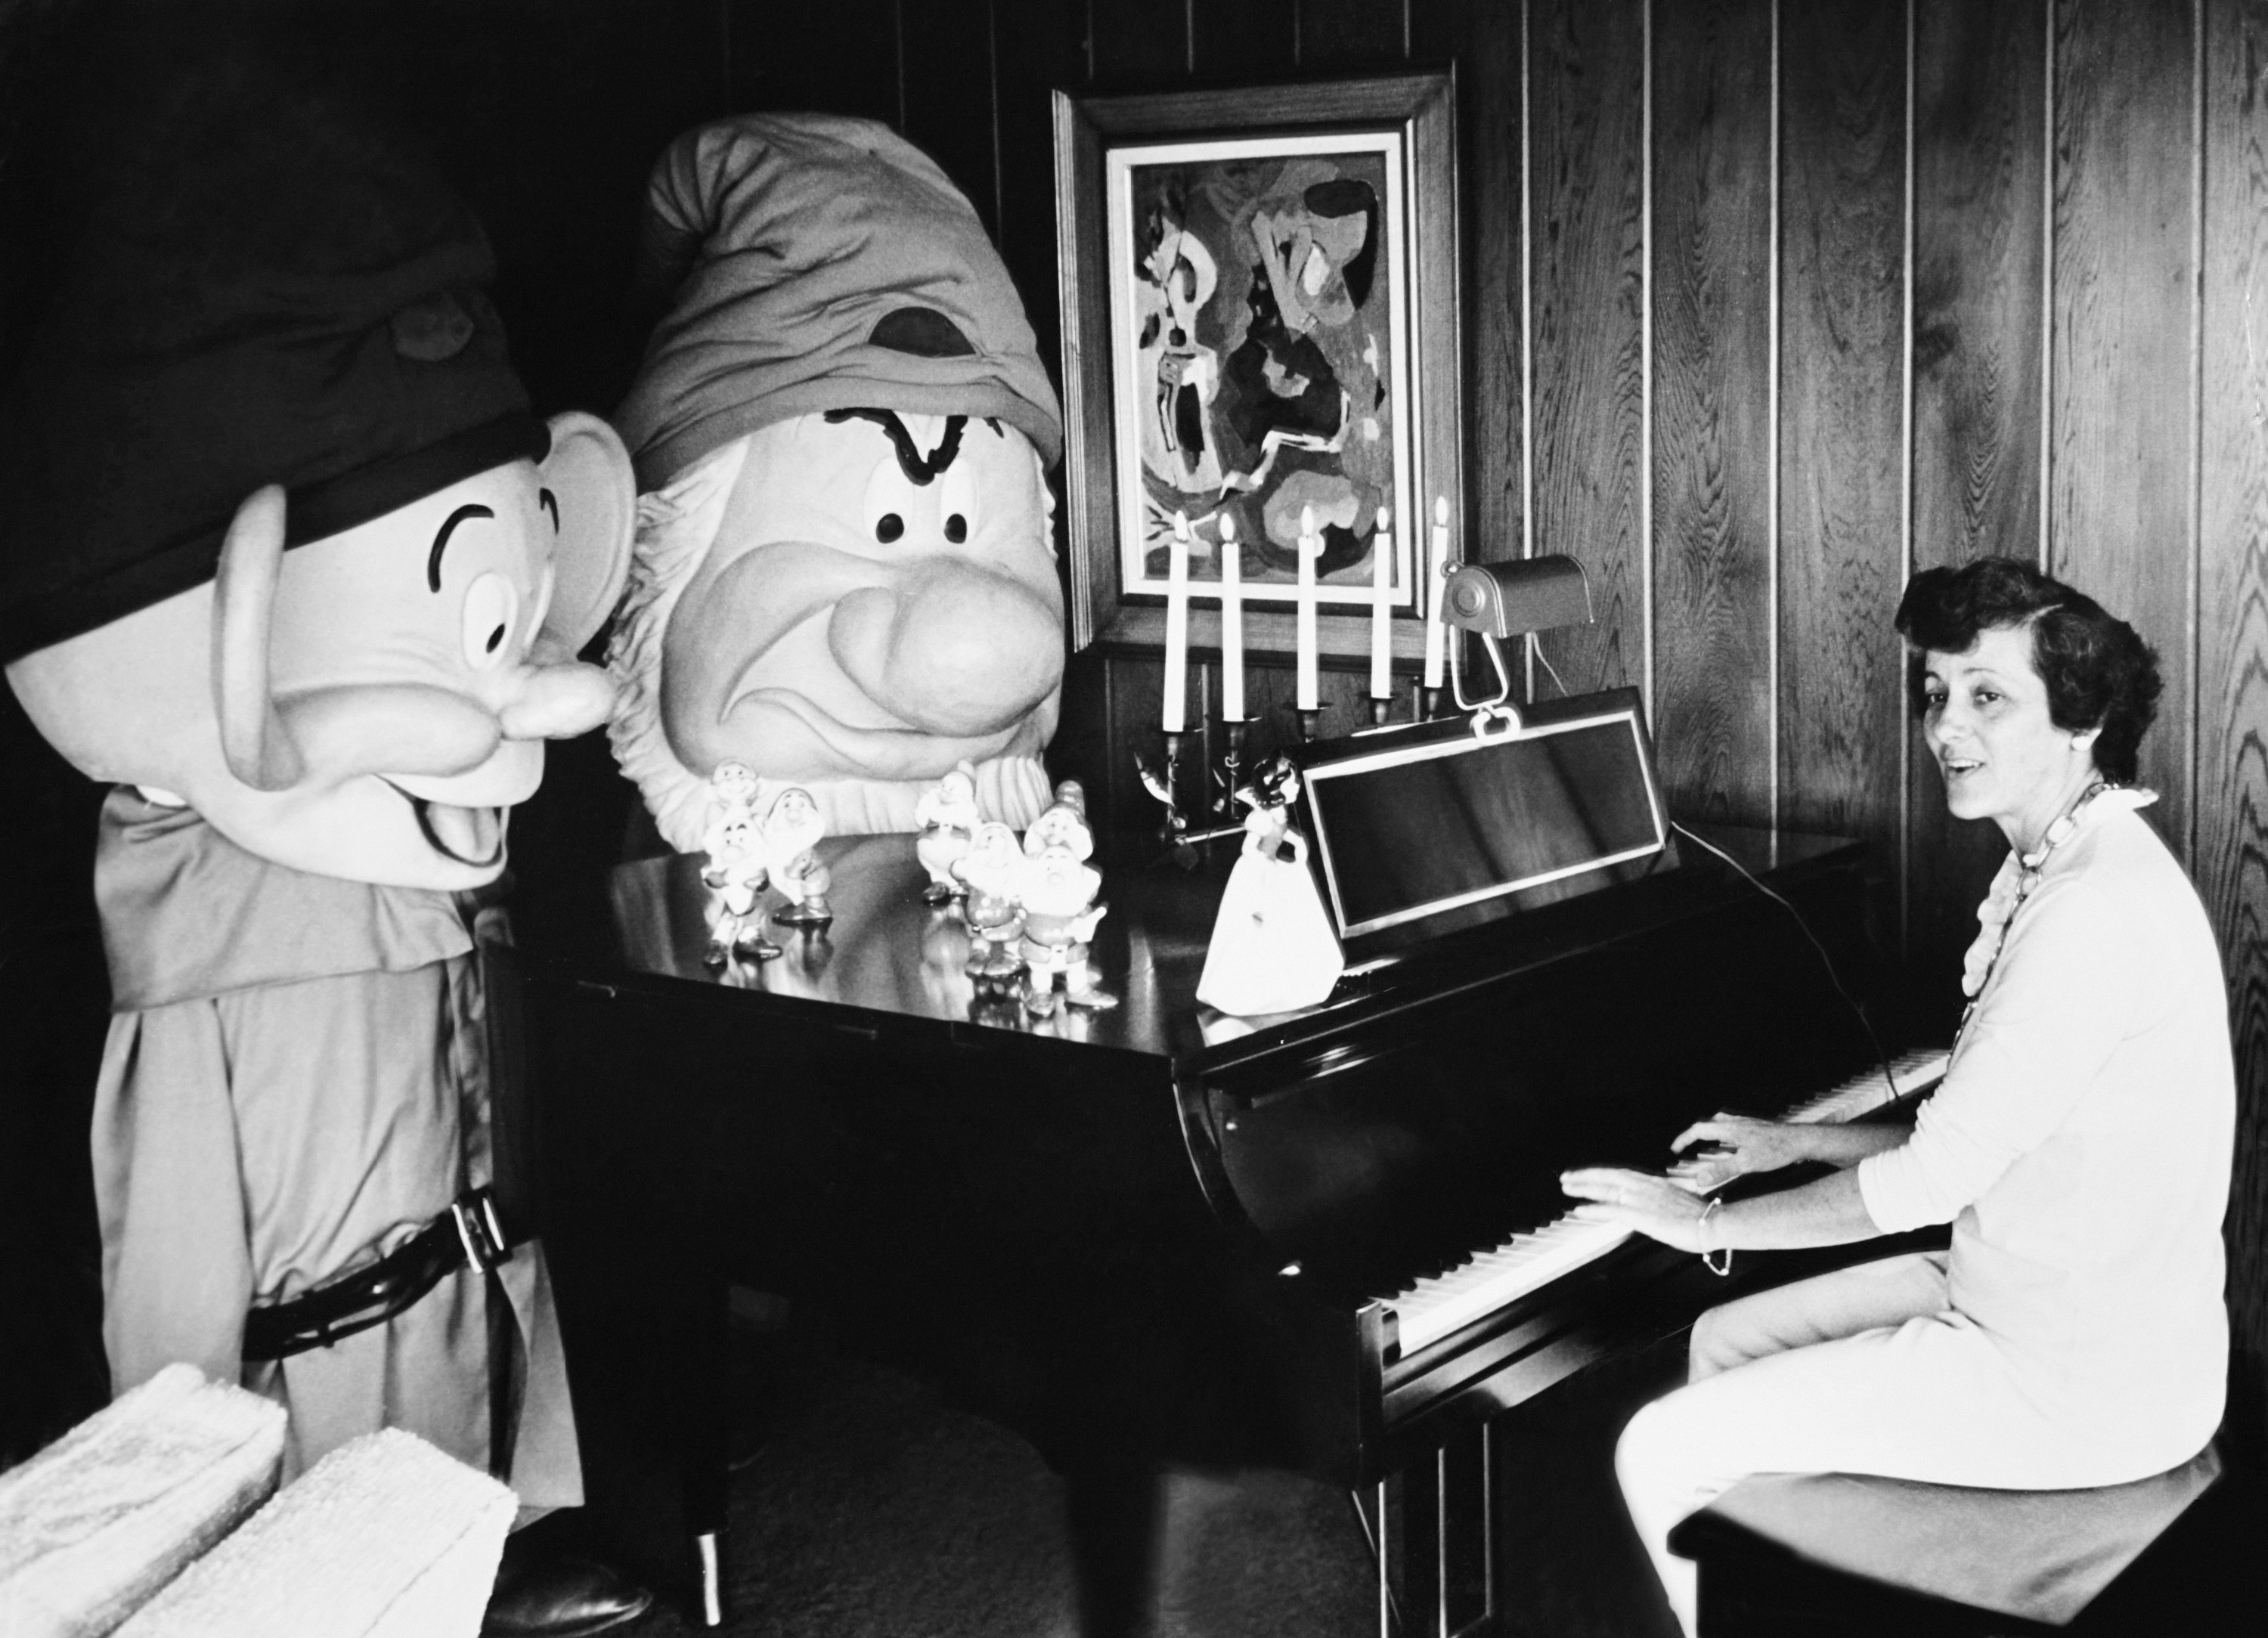 A woman playing piano with two people dressed as Snow White&#x27;s dwarfs standing next to the piano